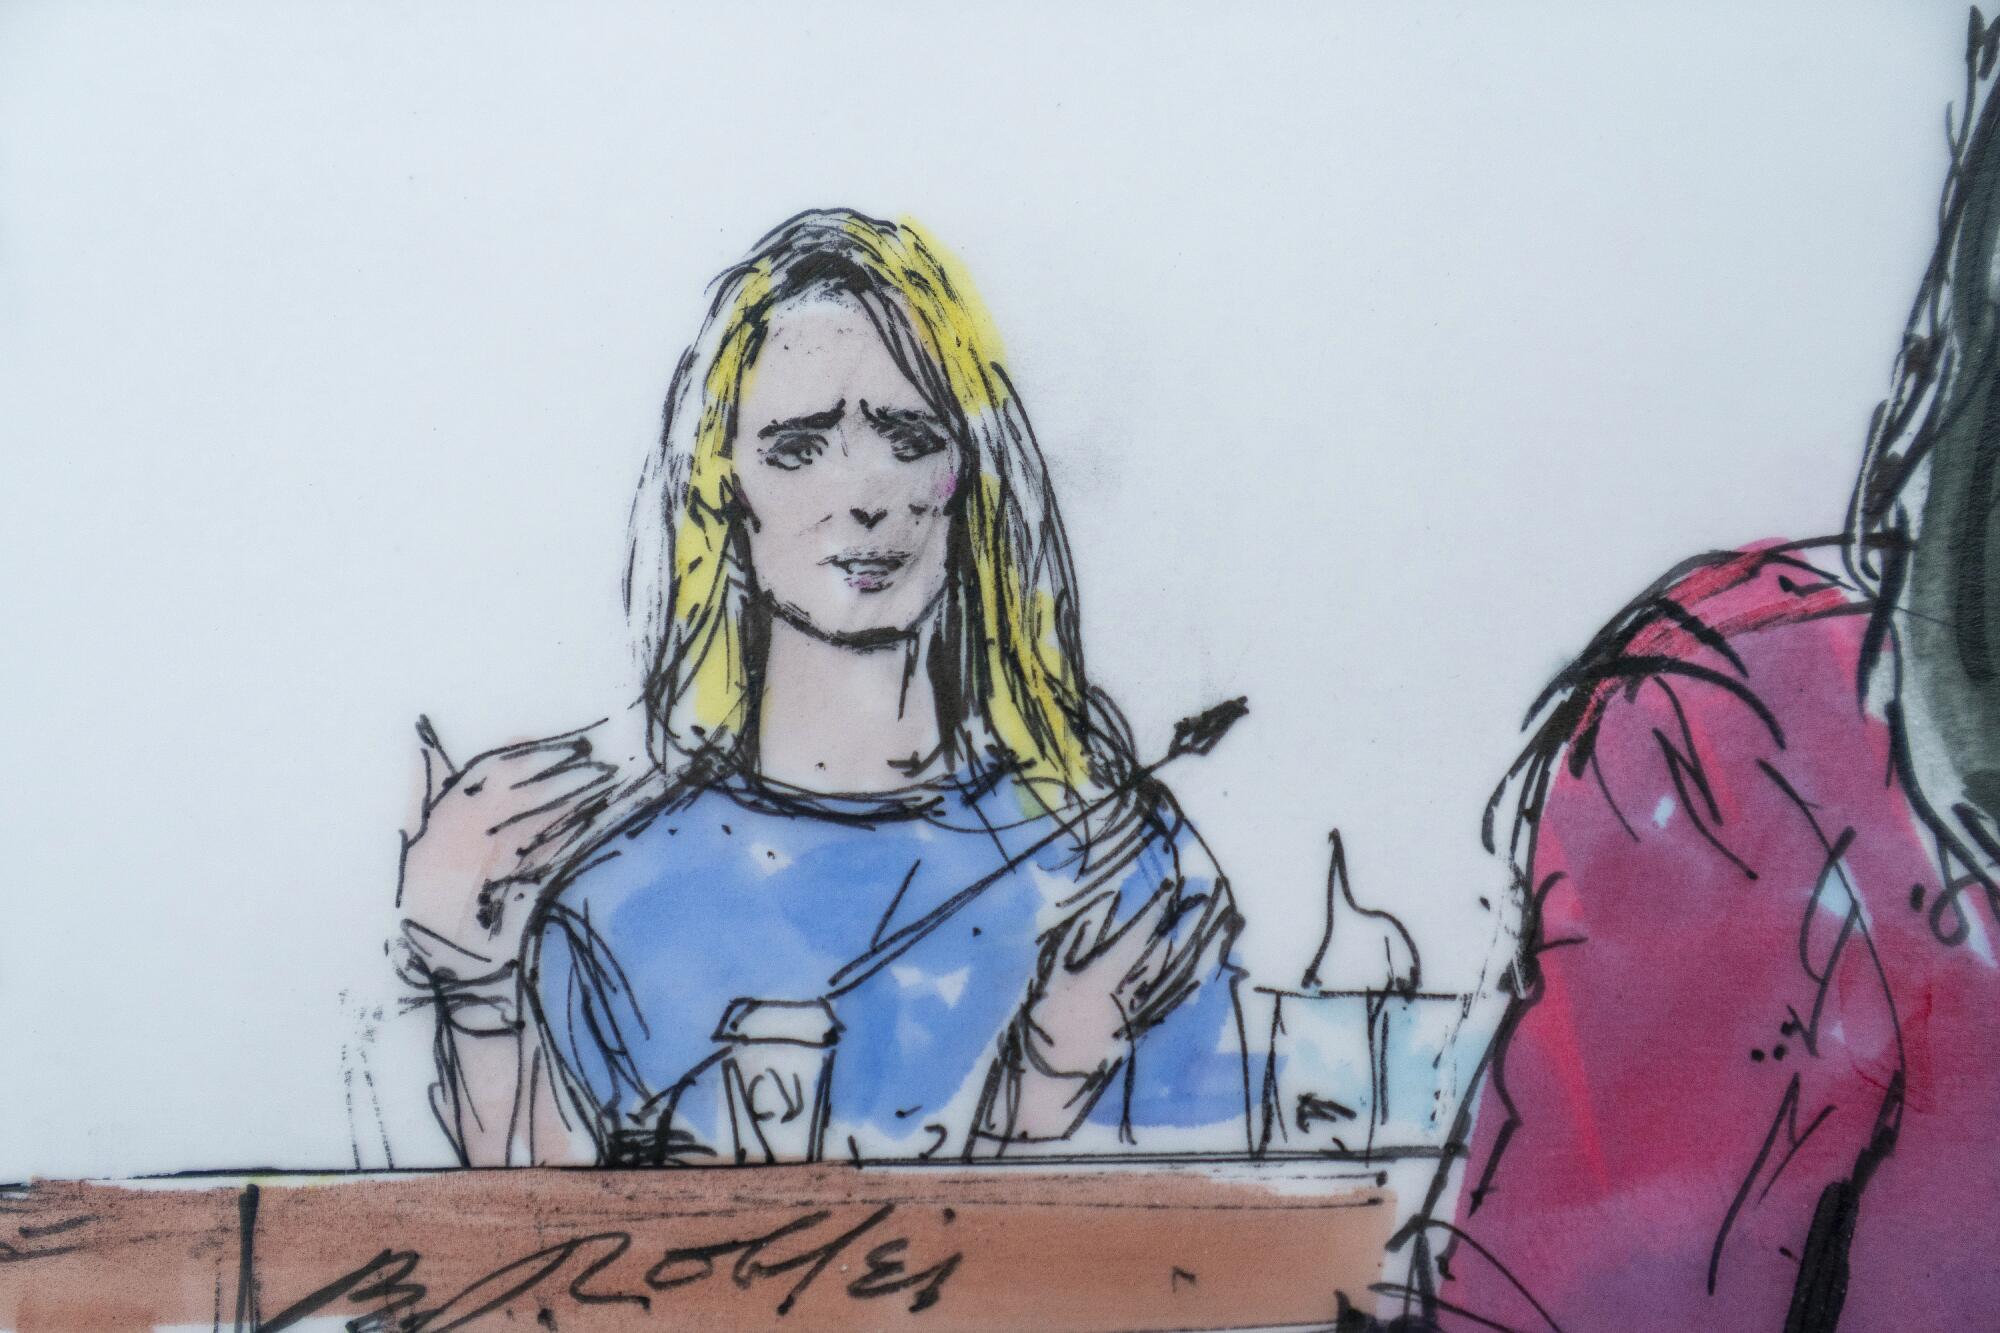 An artist's courtroom sketch of a woman speaking from a witness stand